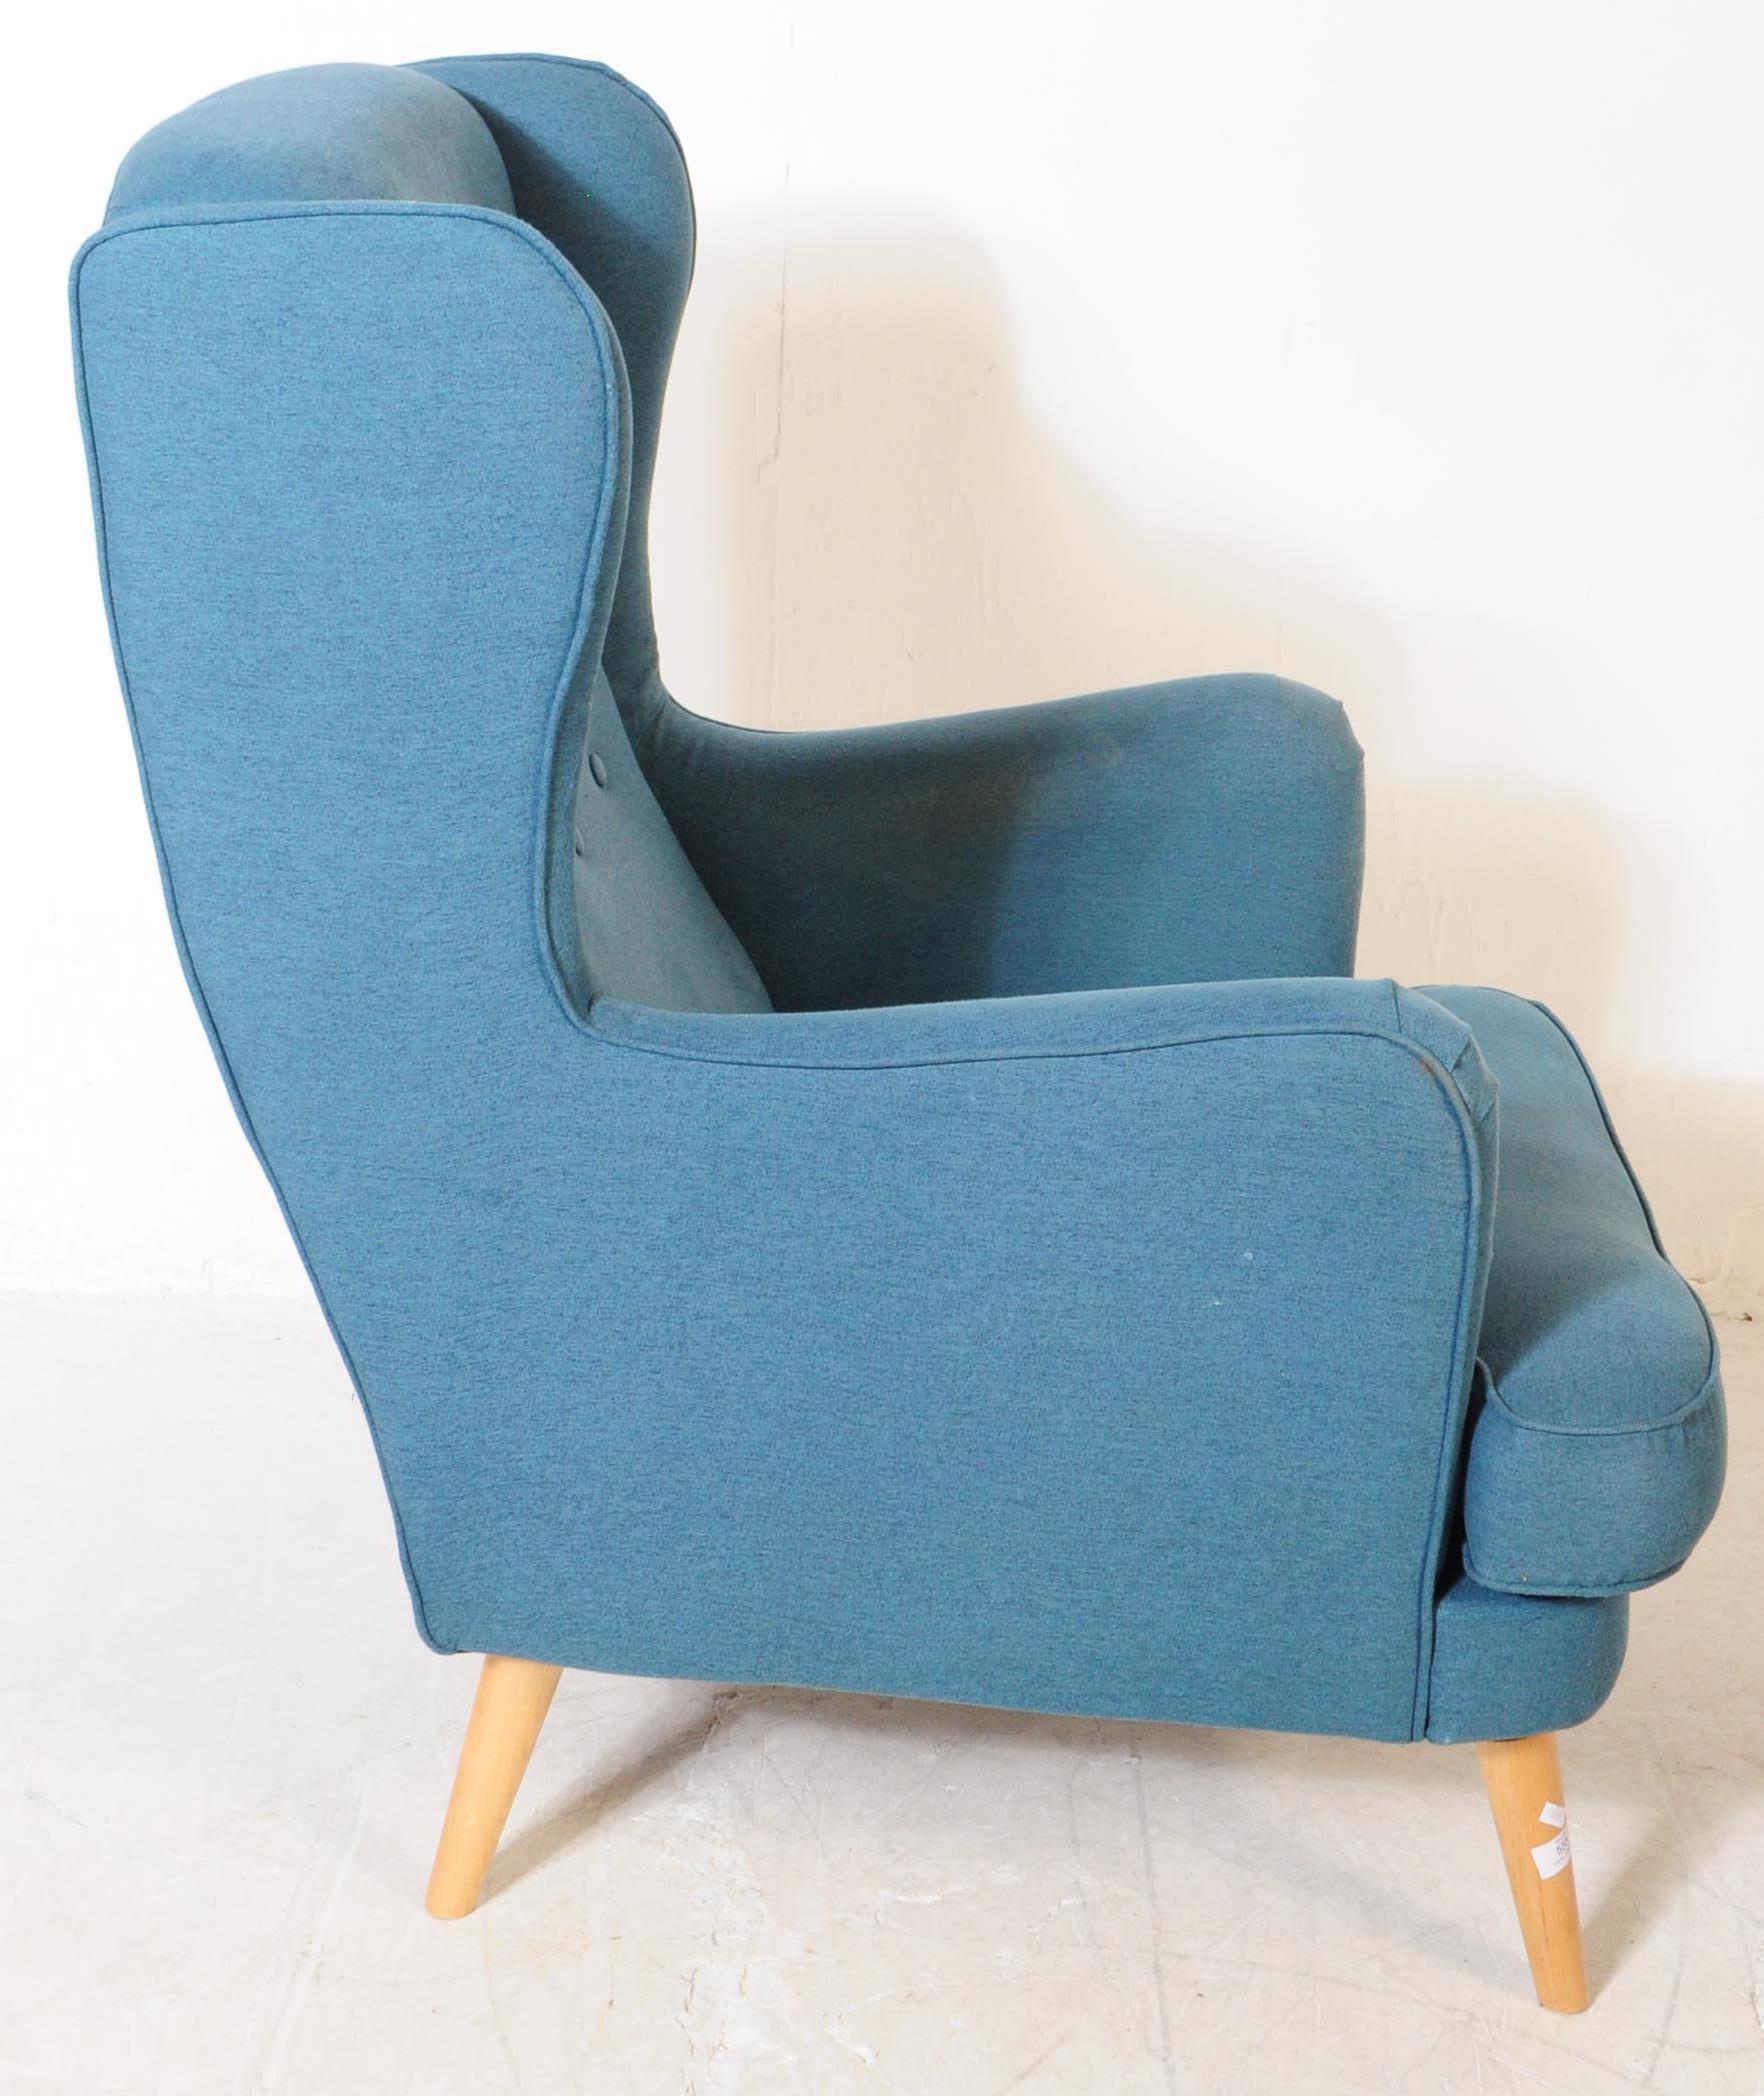 BRITISH MODERN DESIGN - CONTEMPORARY WINGBACK ARMCHAIR - Image 3 of 4